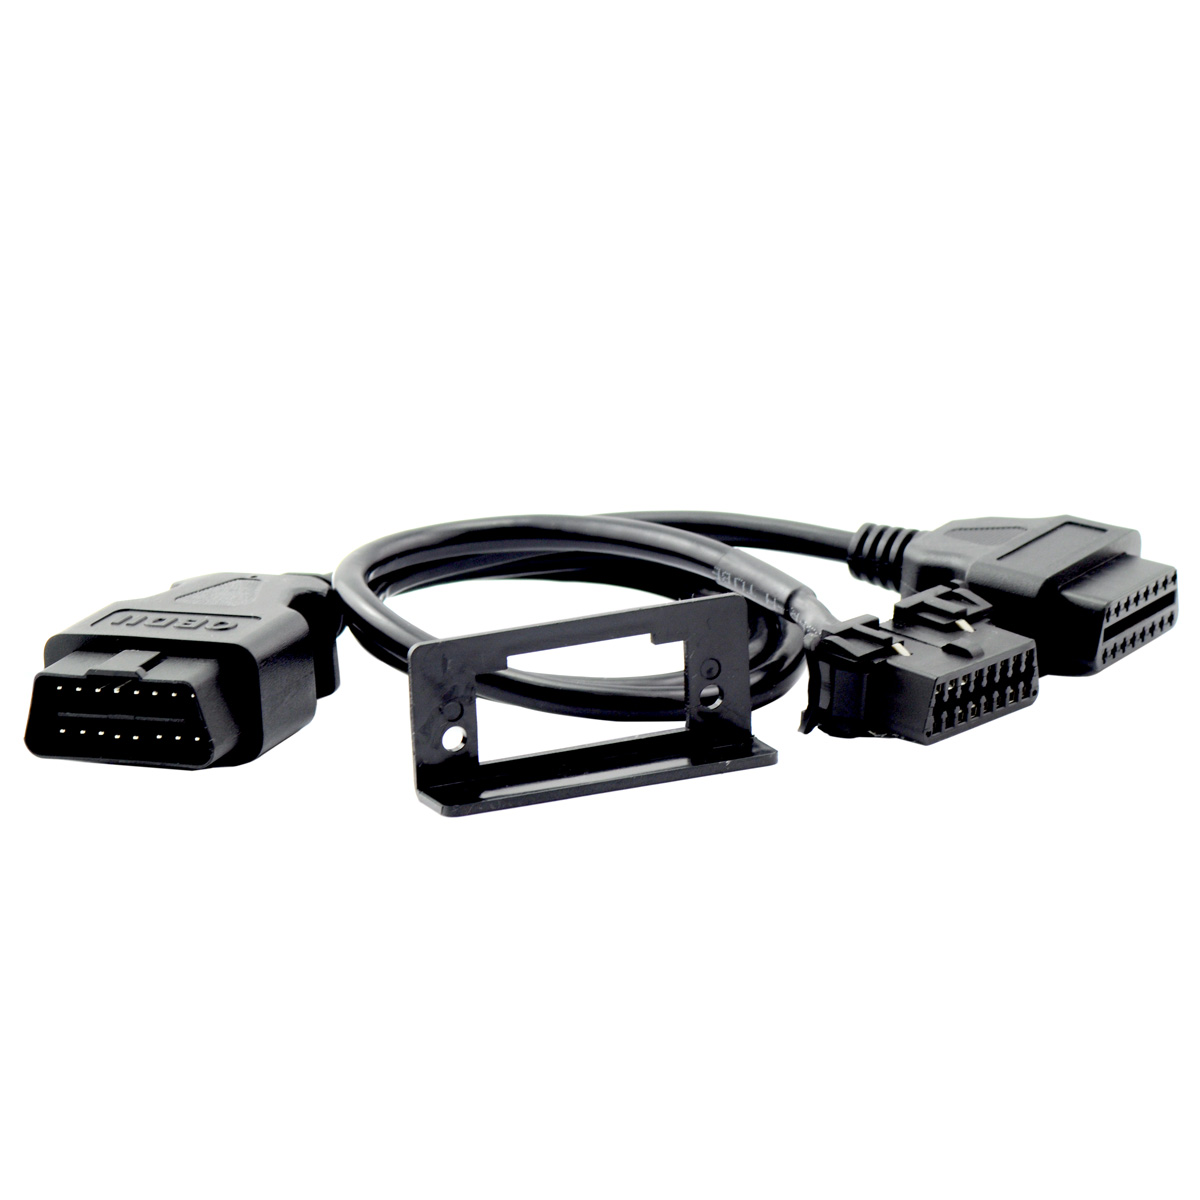 16pin OBDII YSplitter Cable with Underdash Bracket for KIA Mazda - Click Image to Close